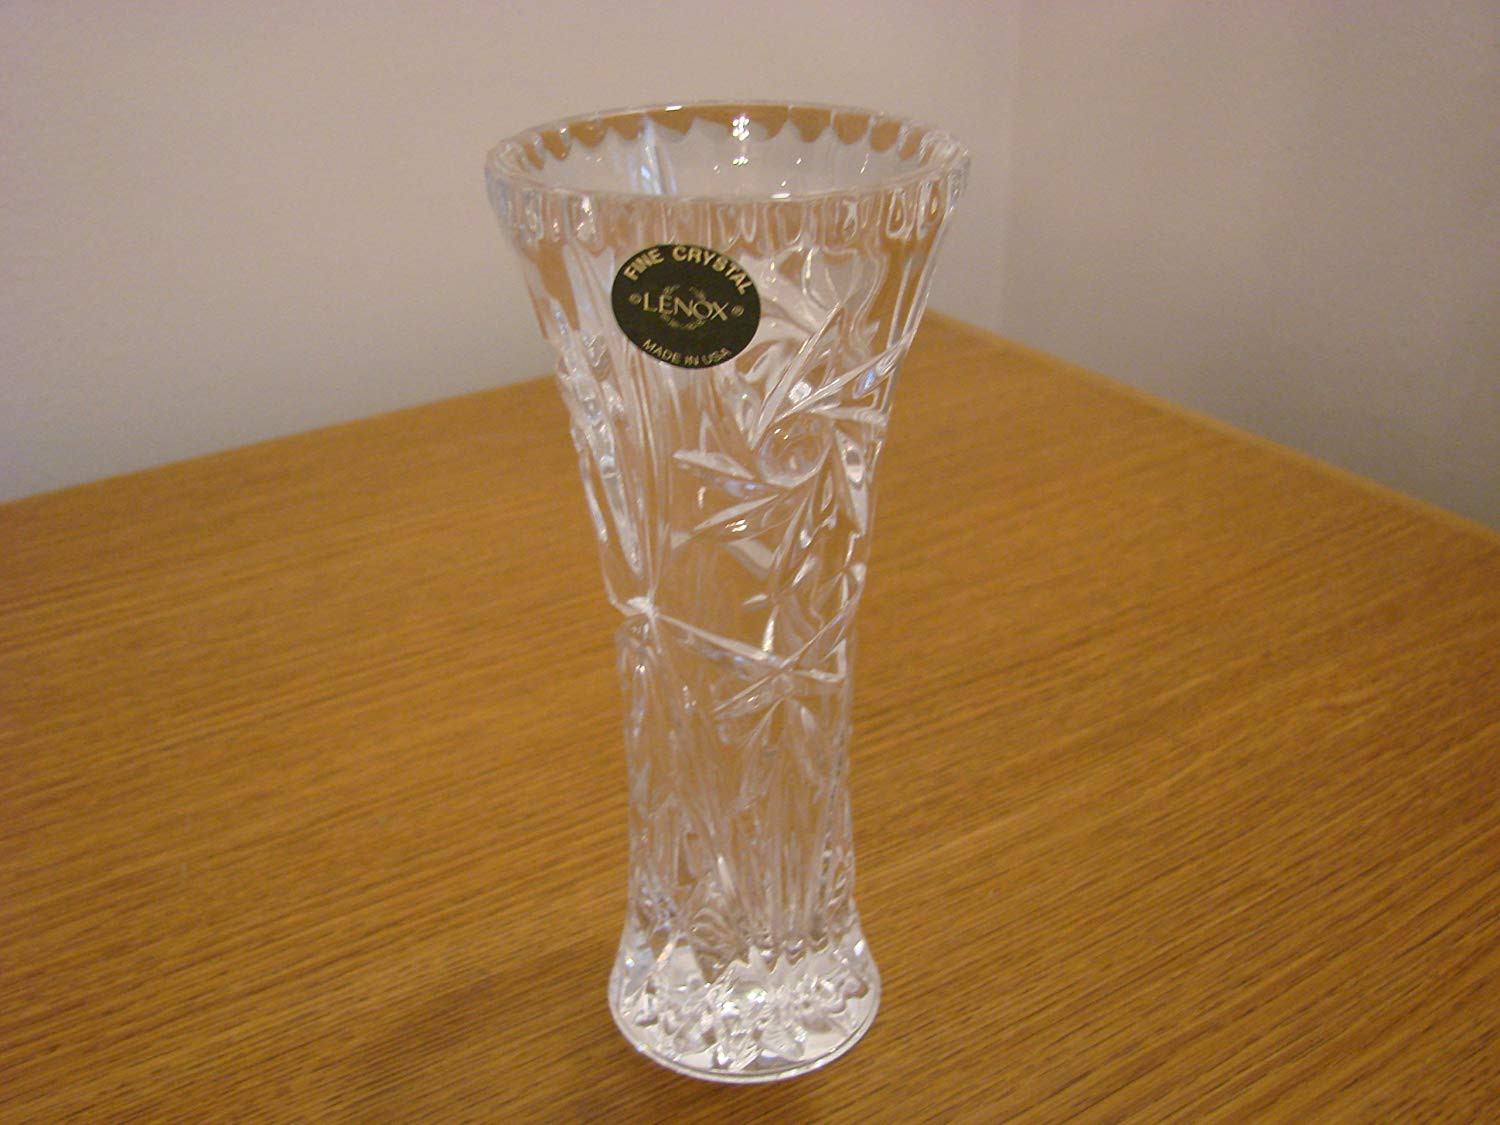 mikasa florale vase of amazon com lenox crystal star vase from lenox collections 6 inches within amazon com lenox crystal star vase from lenox collections 6 inches home kitchen